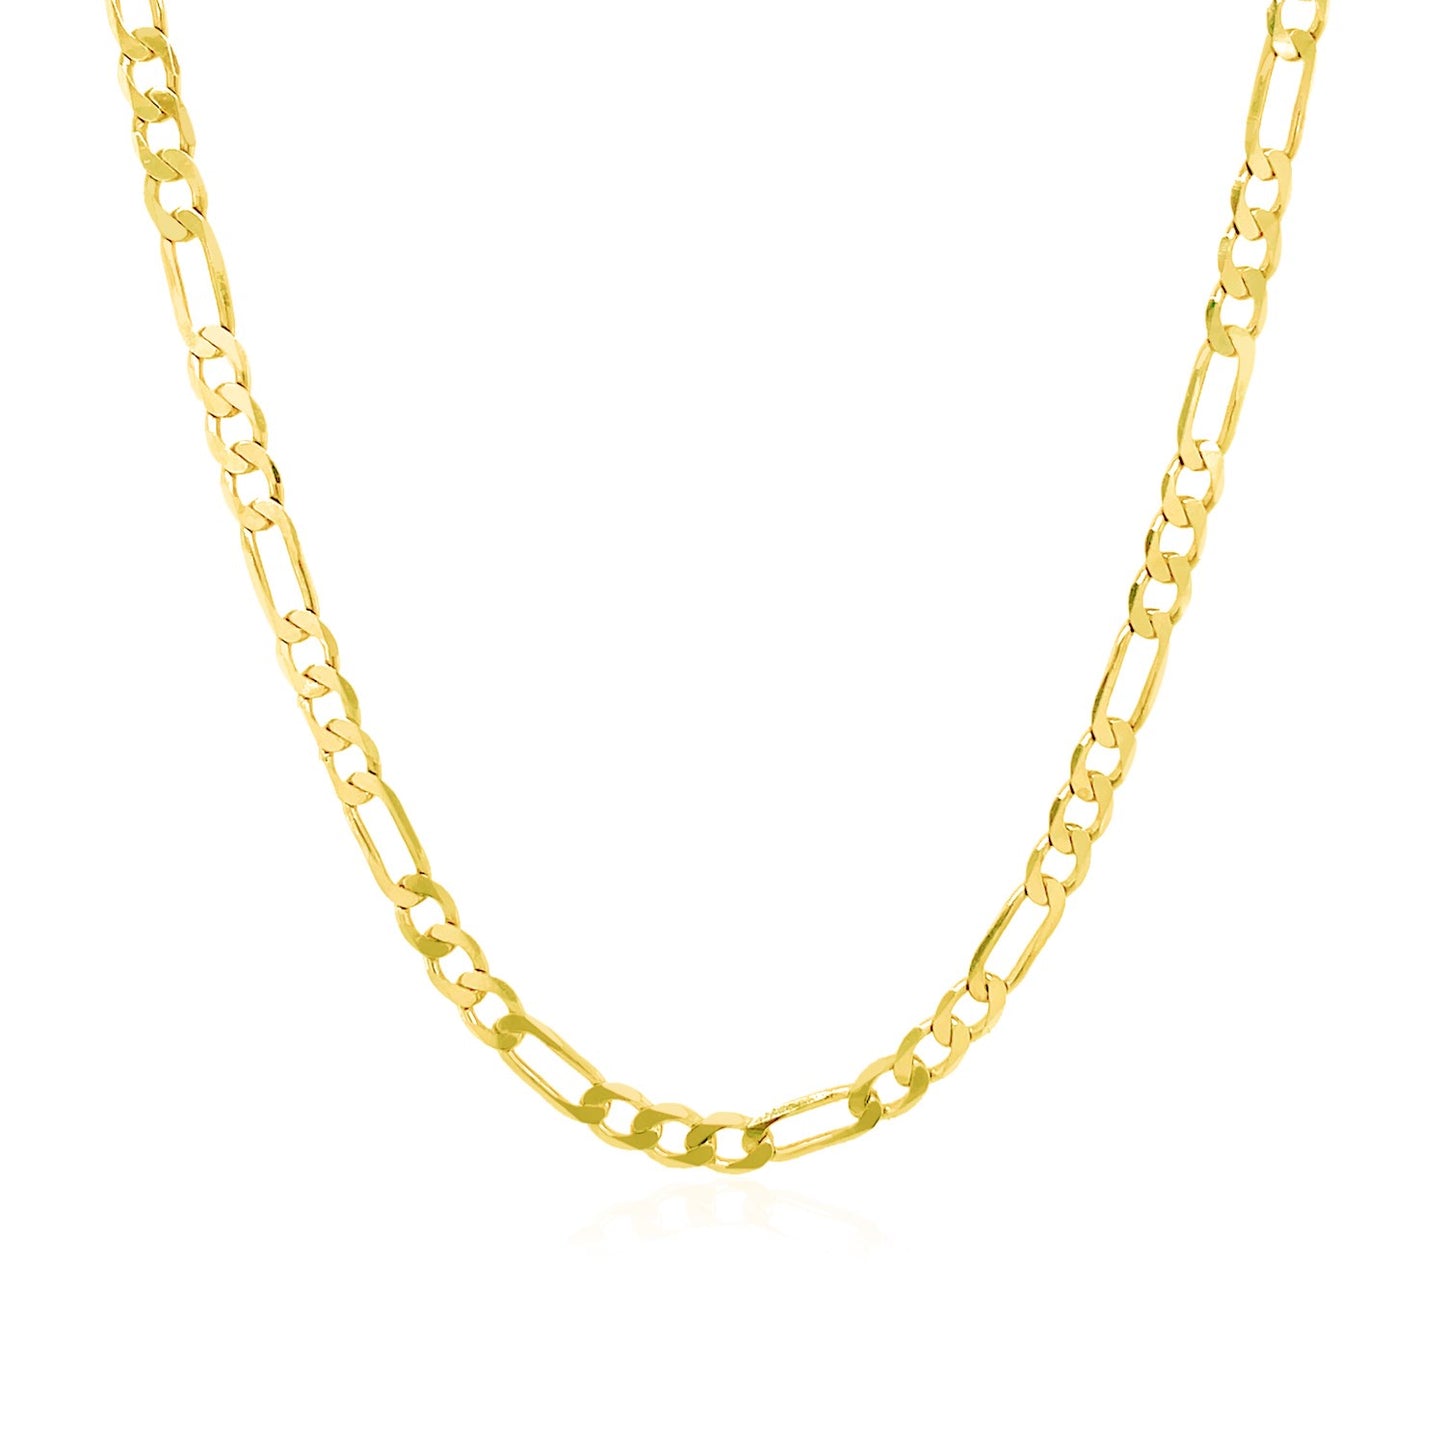 3.1mm 14k Yellow Gold Solid Figaro Chain